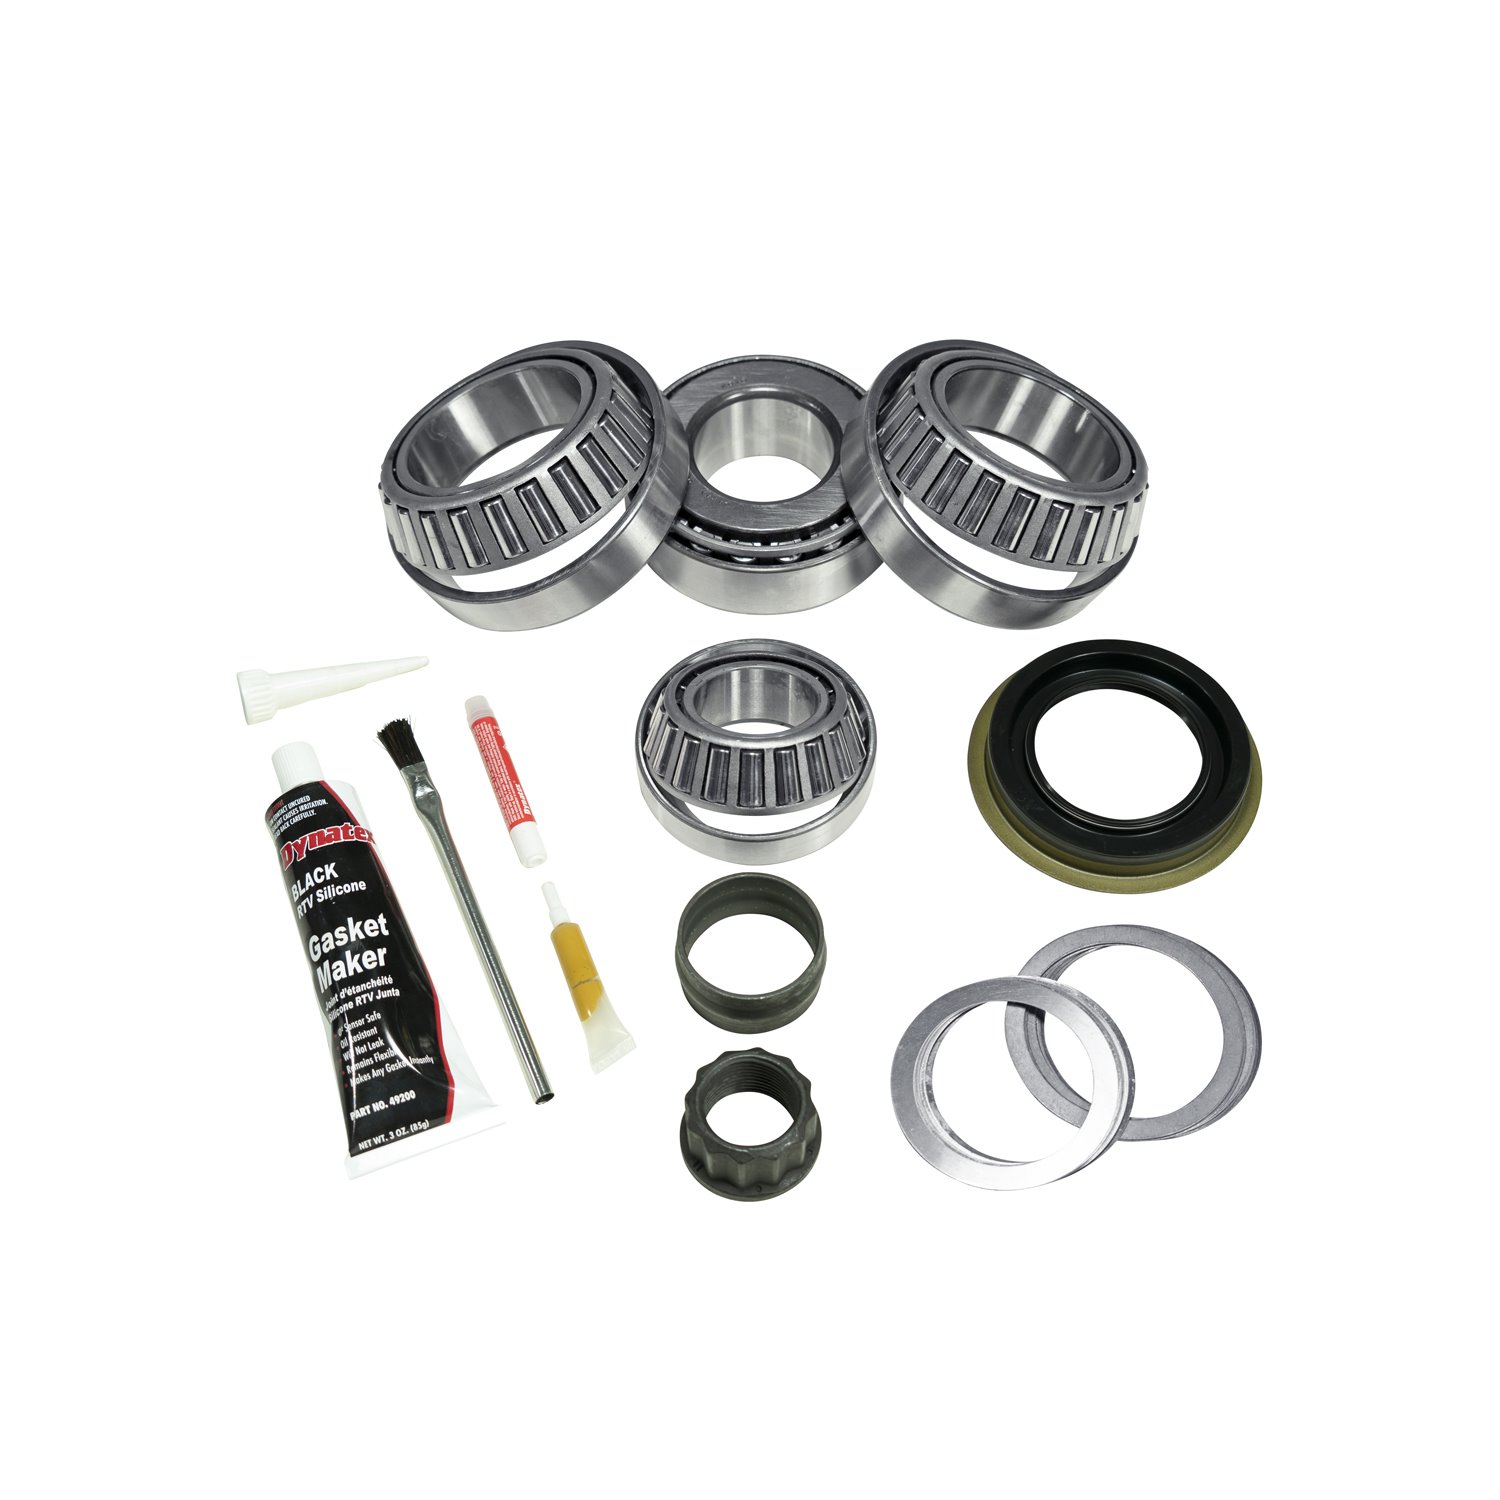 AAM115K1001 Differential Master Overhaul Kit for 2001-2010 GM & Ram 2500, 3500 Trucks w/AAM 11.5 in. Differential